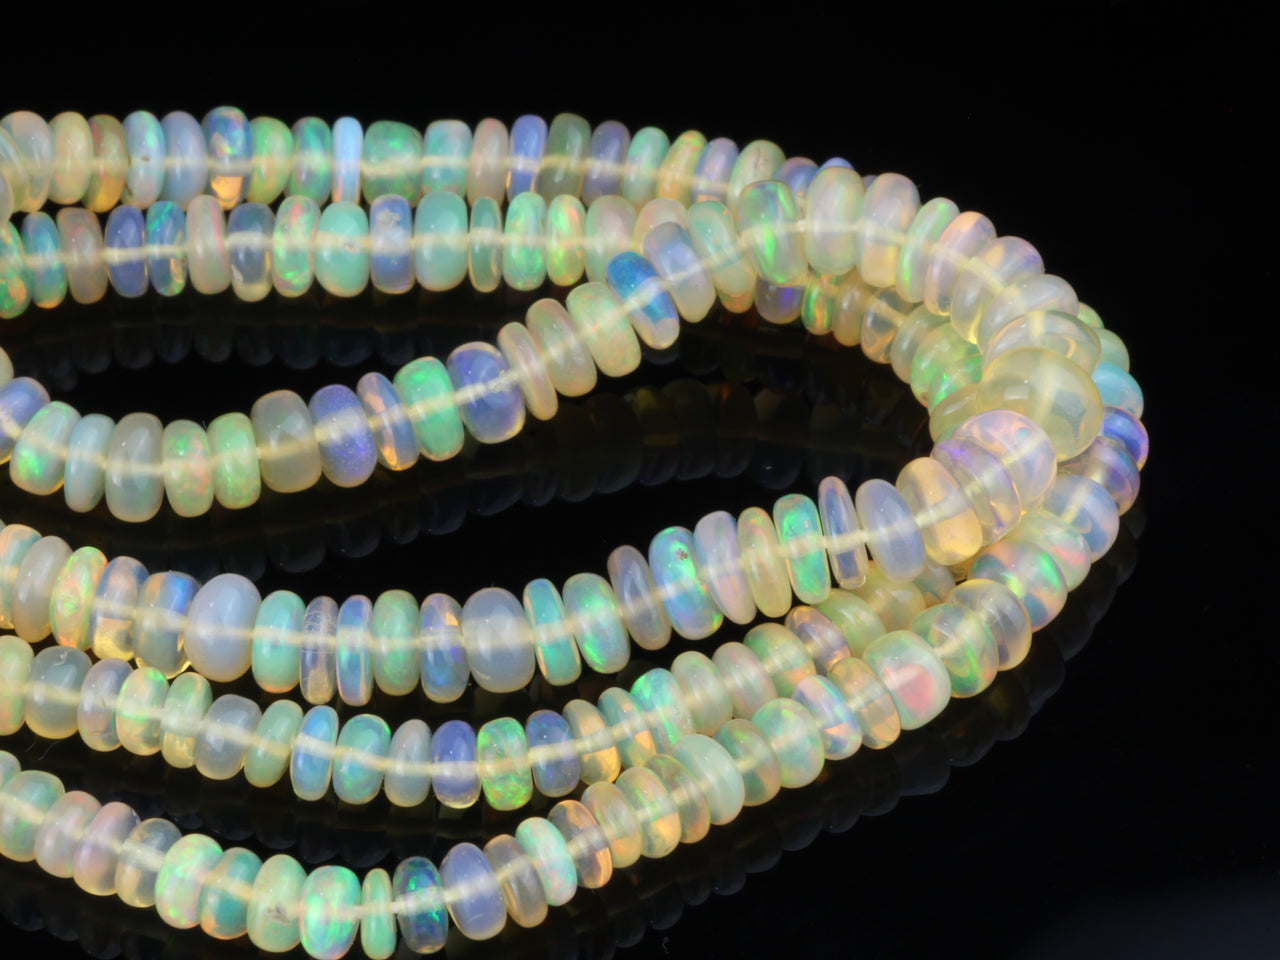 Yellow Ethiopian Opal 4mm - 5mm Smooth Rondelles Bead Strand